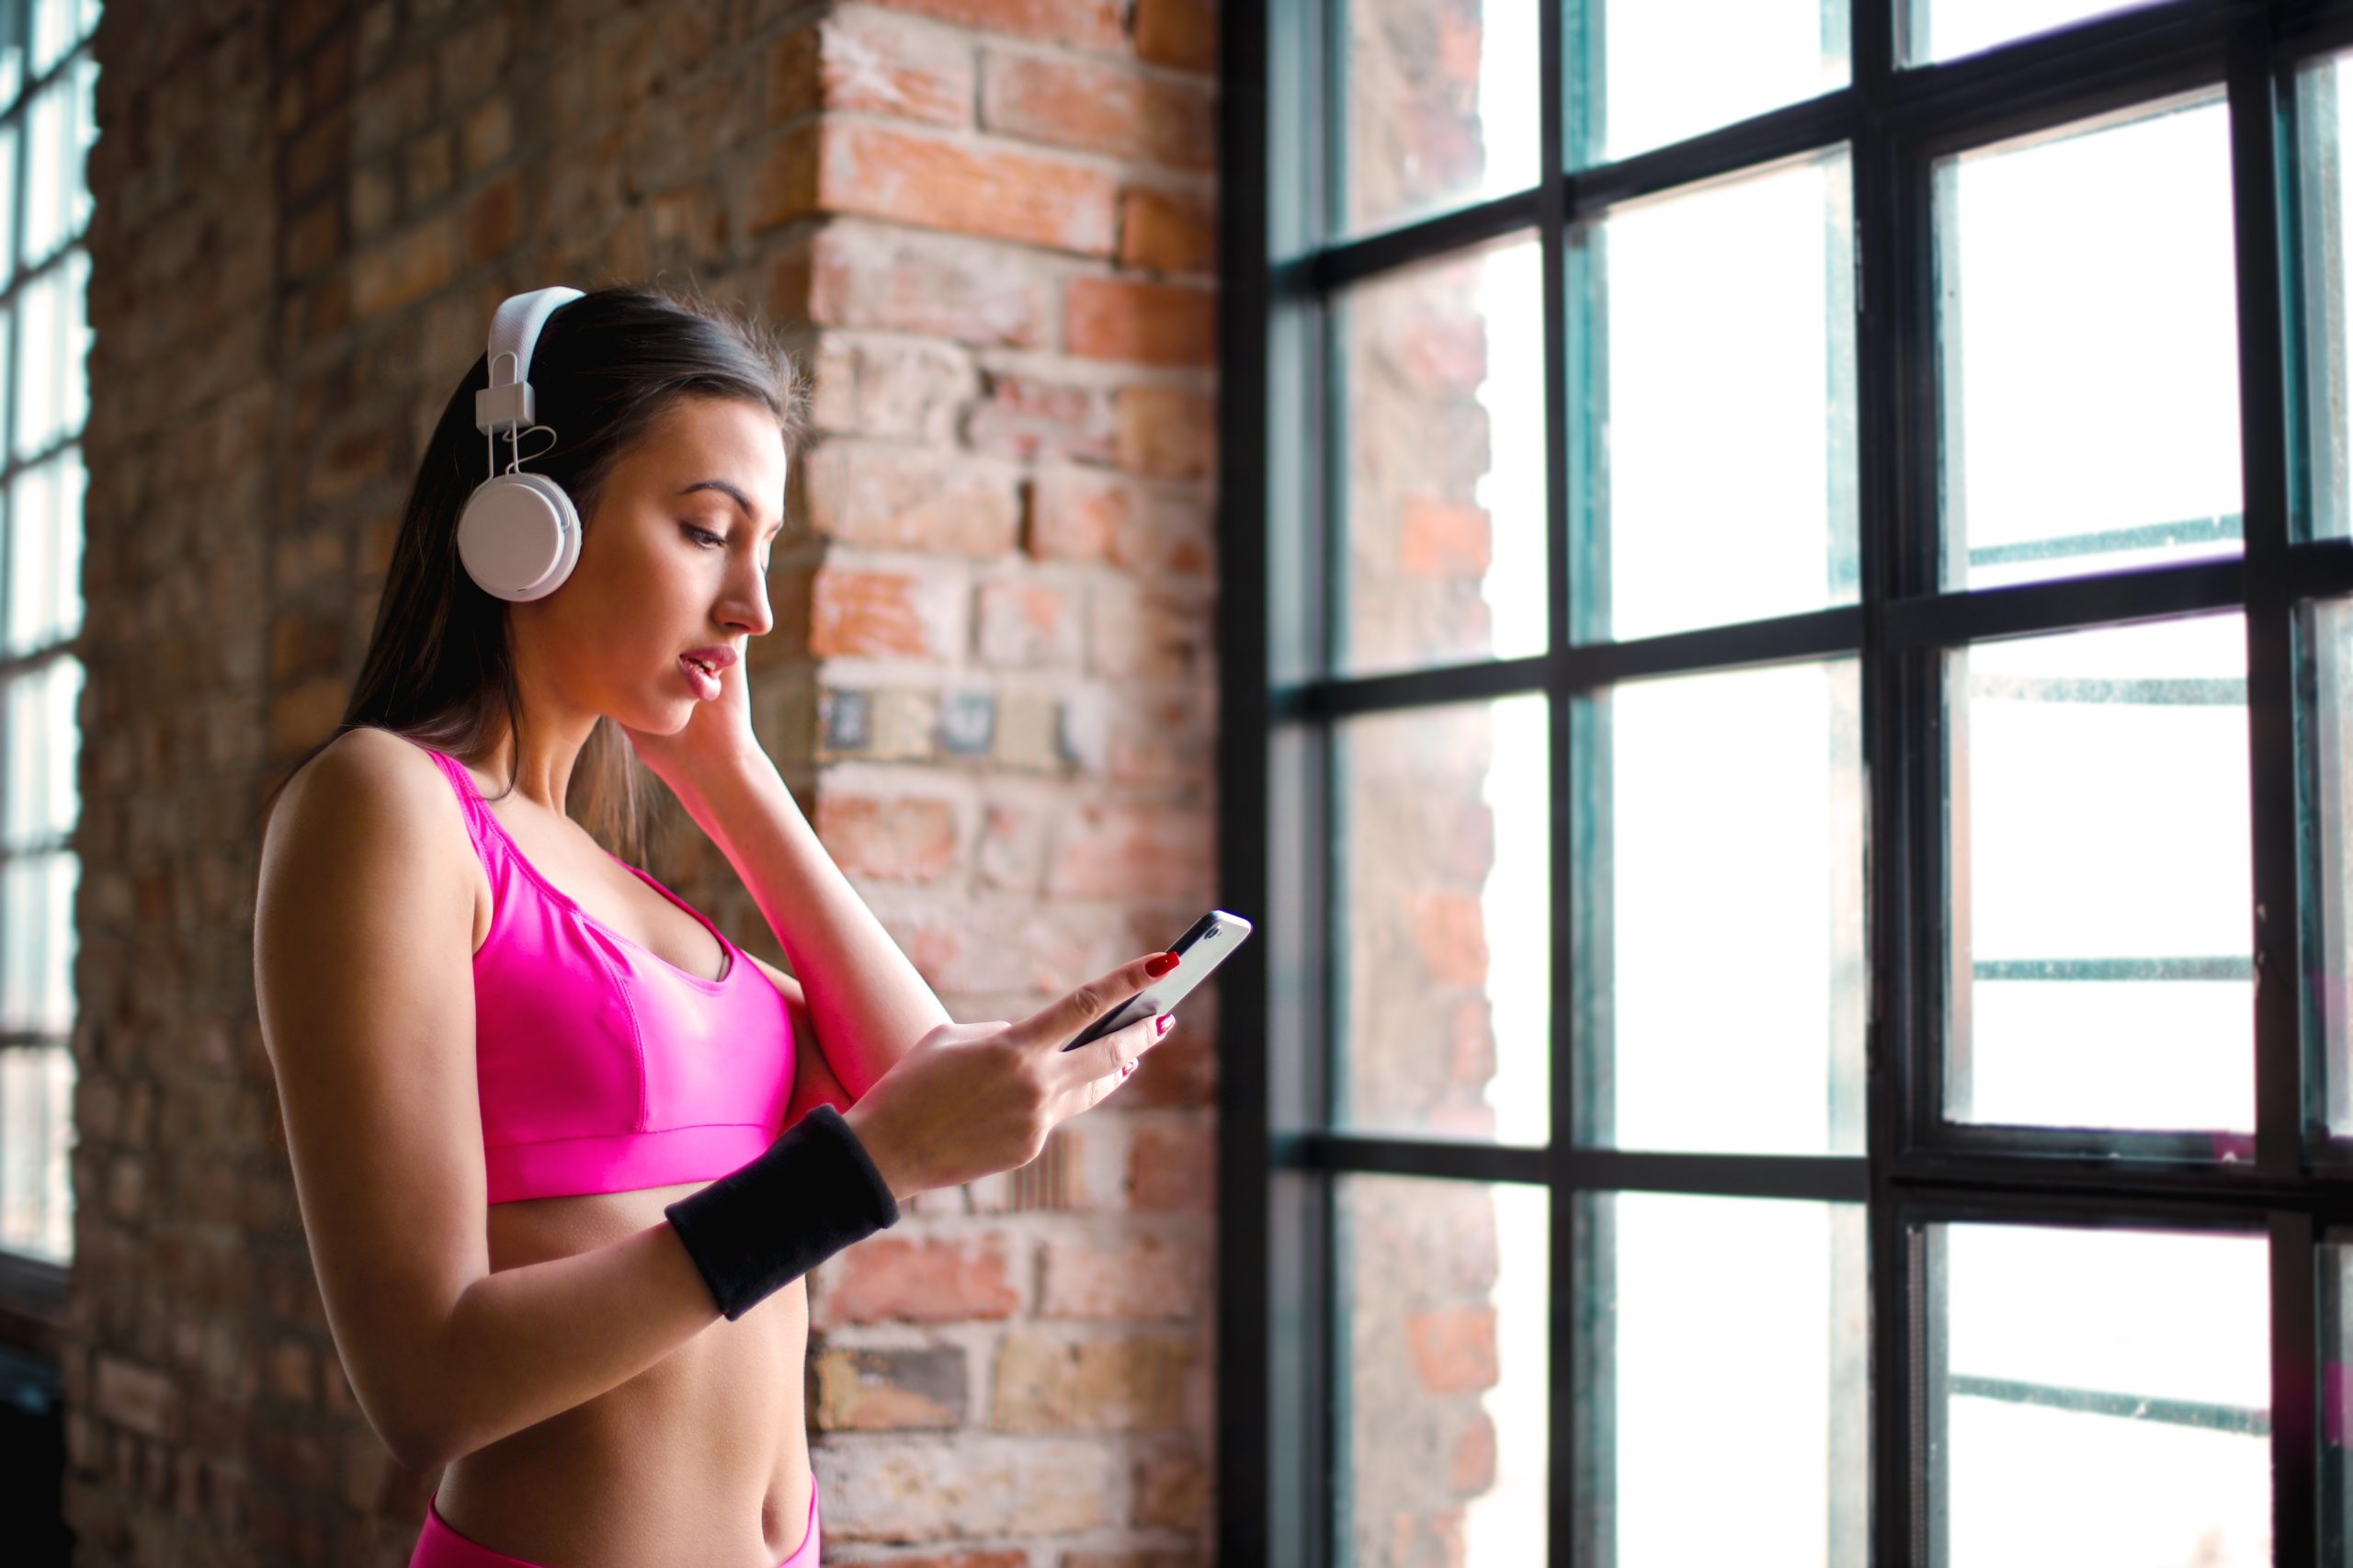 |Free online fitness tools to get you through quarantine and burn off excess energy! Read on for some free online fitness resources for staying healthy.